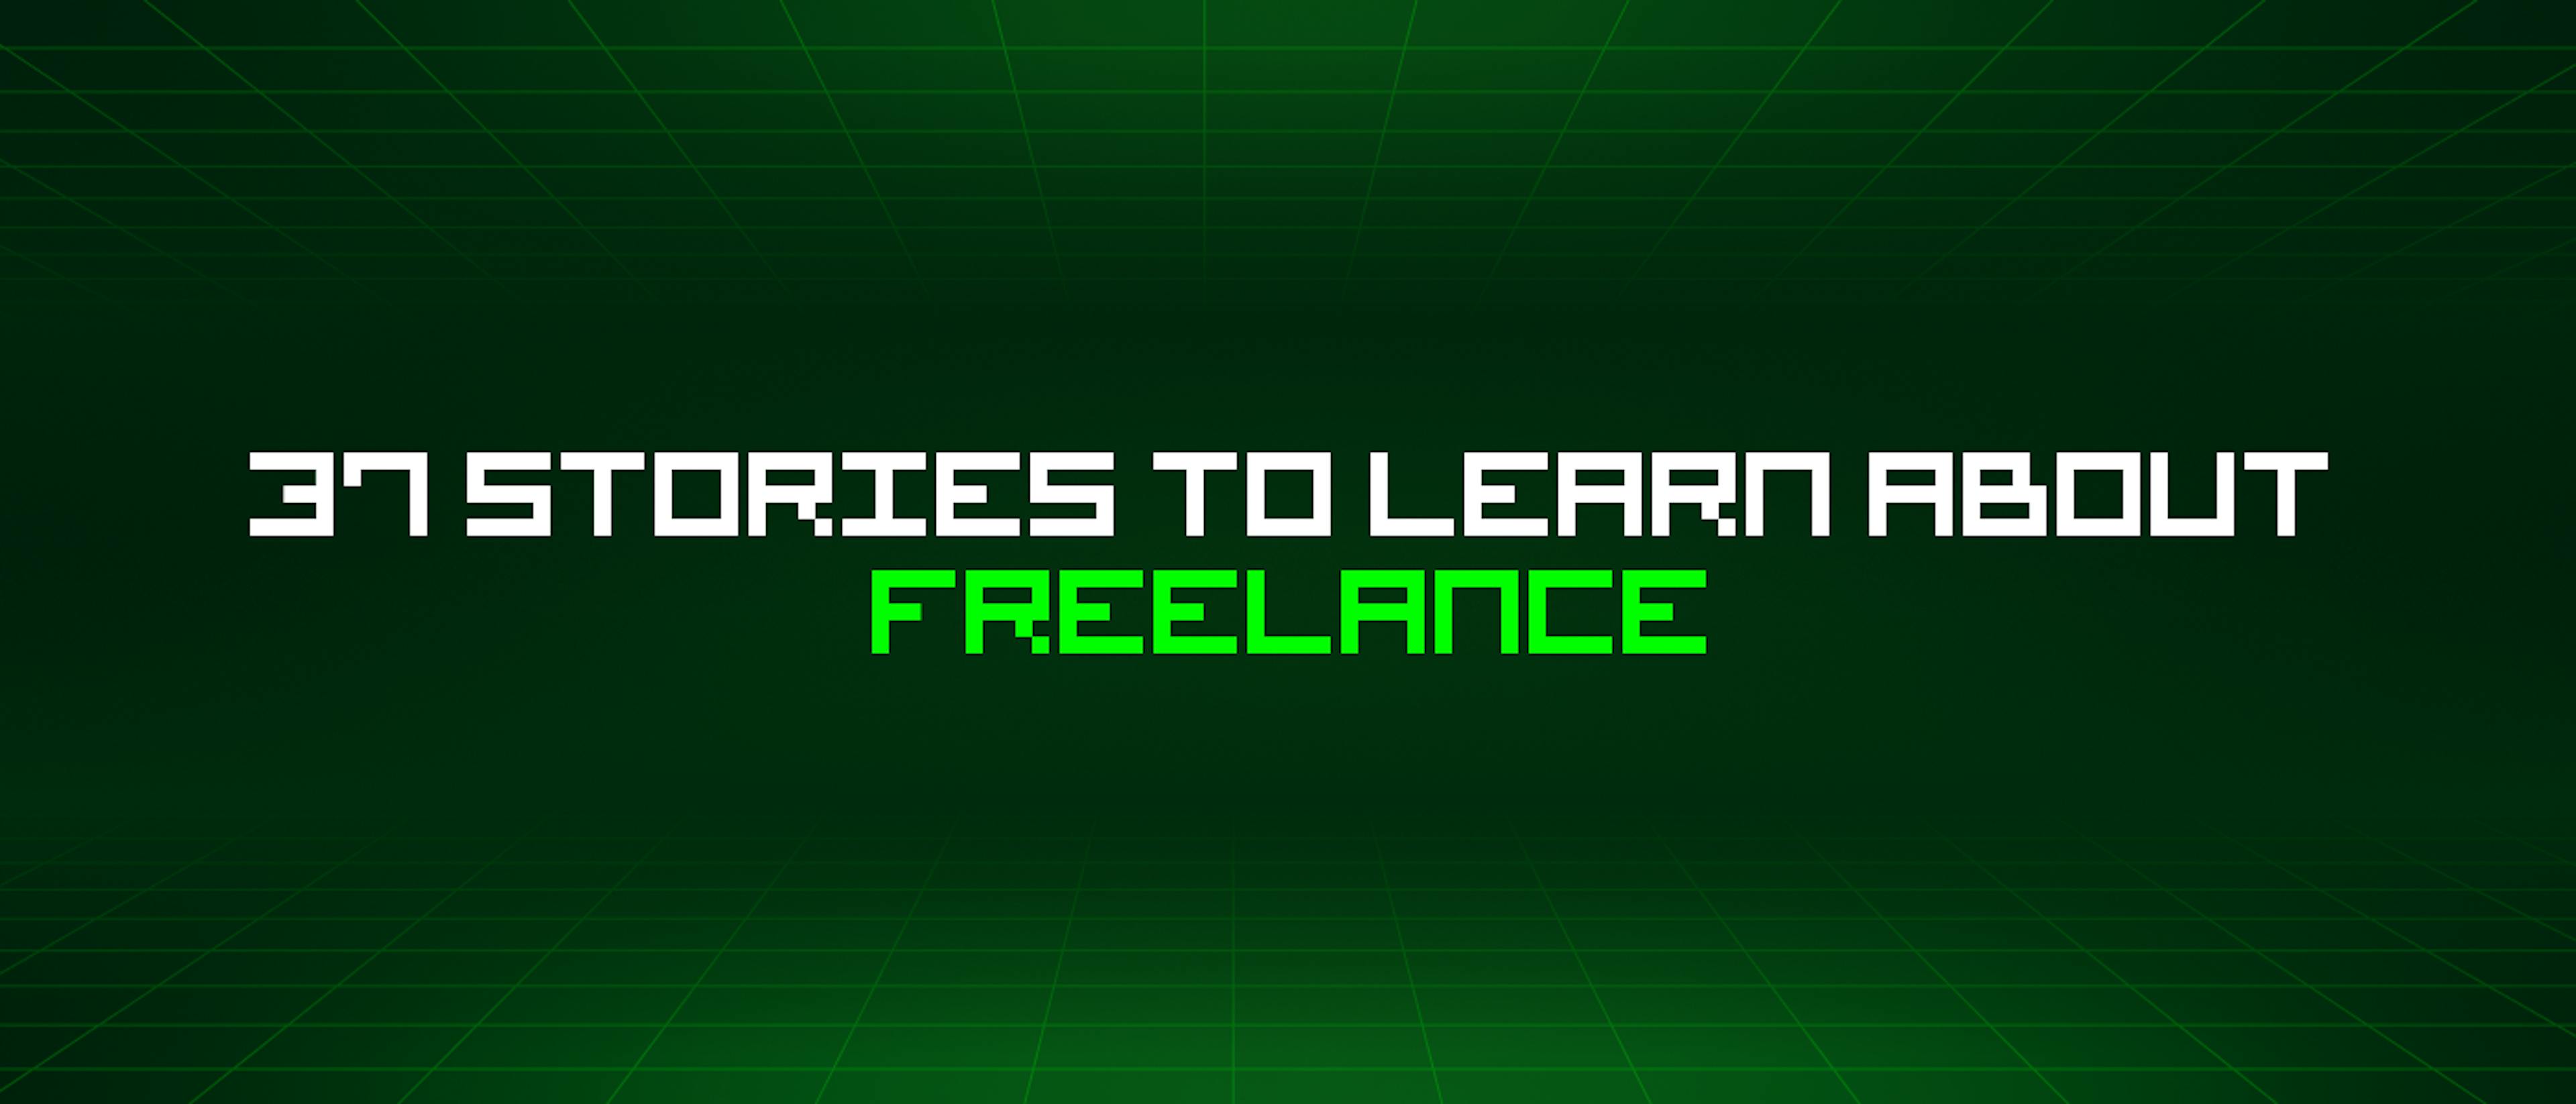 /37-stories-to-learn-about-freelance feature image